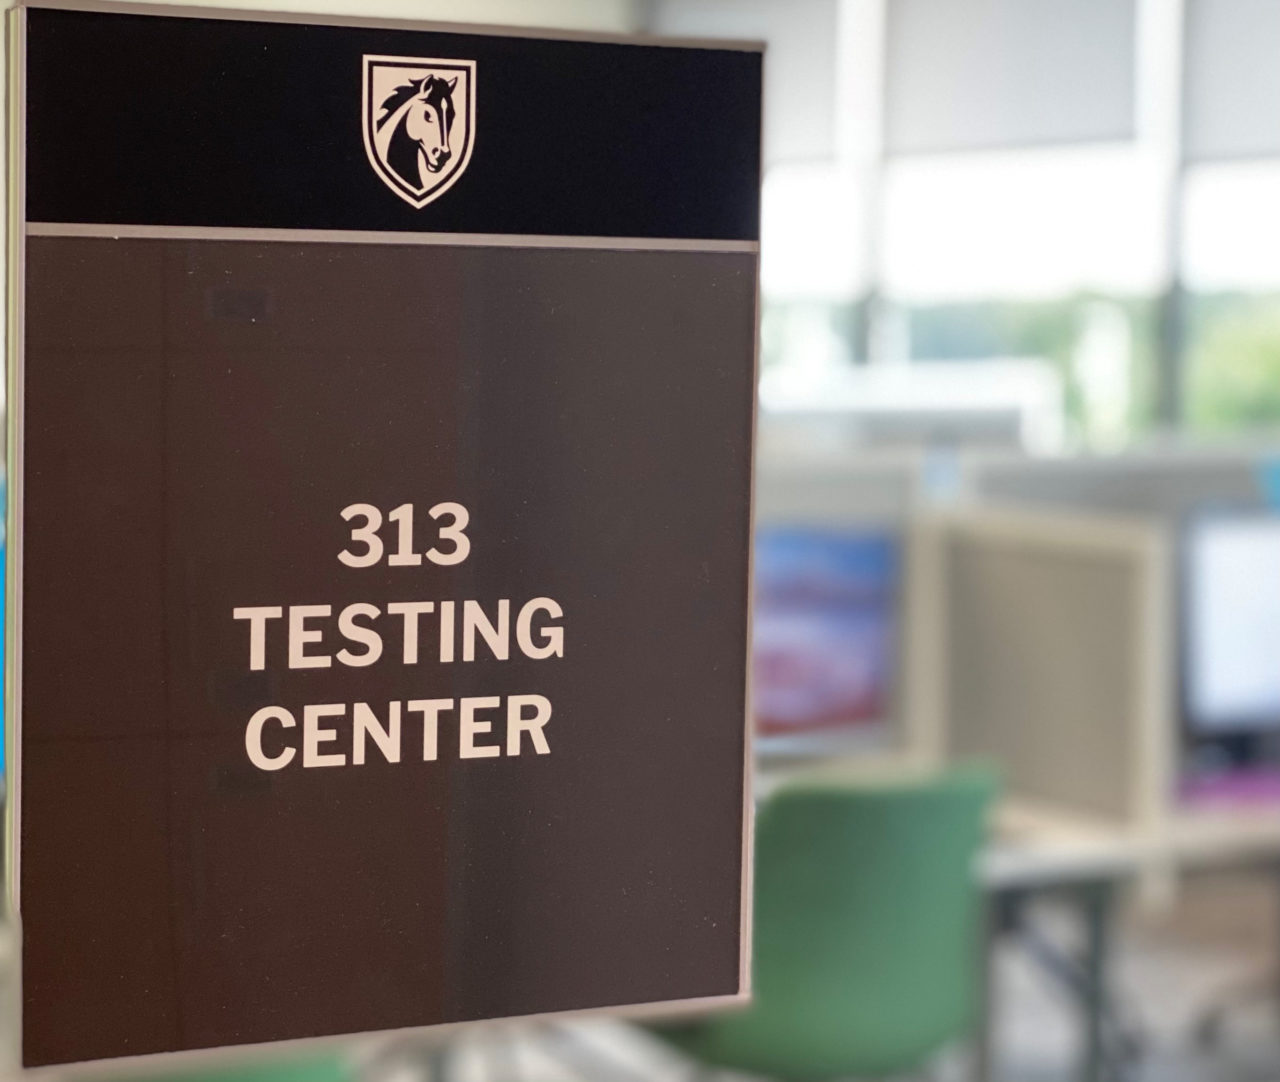 photo of the testing center door sign